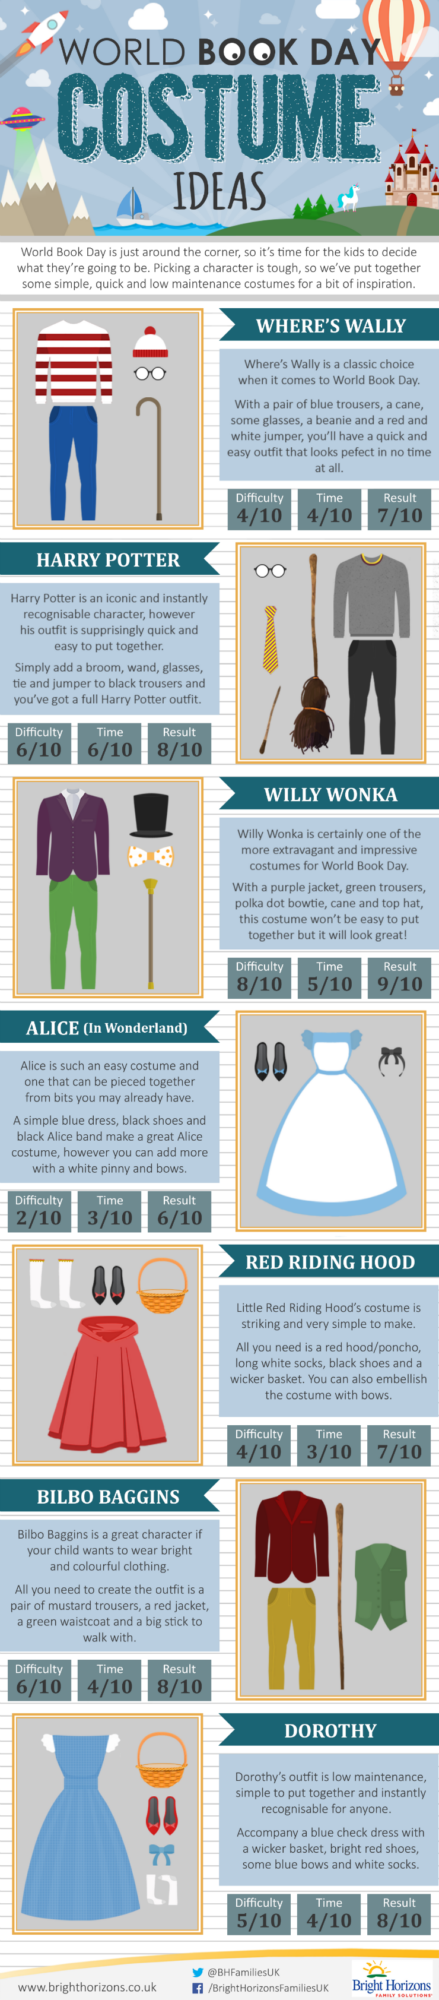 World Book Day Costume Ideas - A collection of great book character costume ideas for World Book Day fancy dress fun rated for ease of construction and effectiveness.